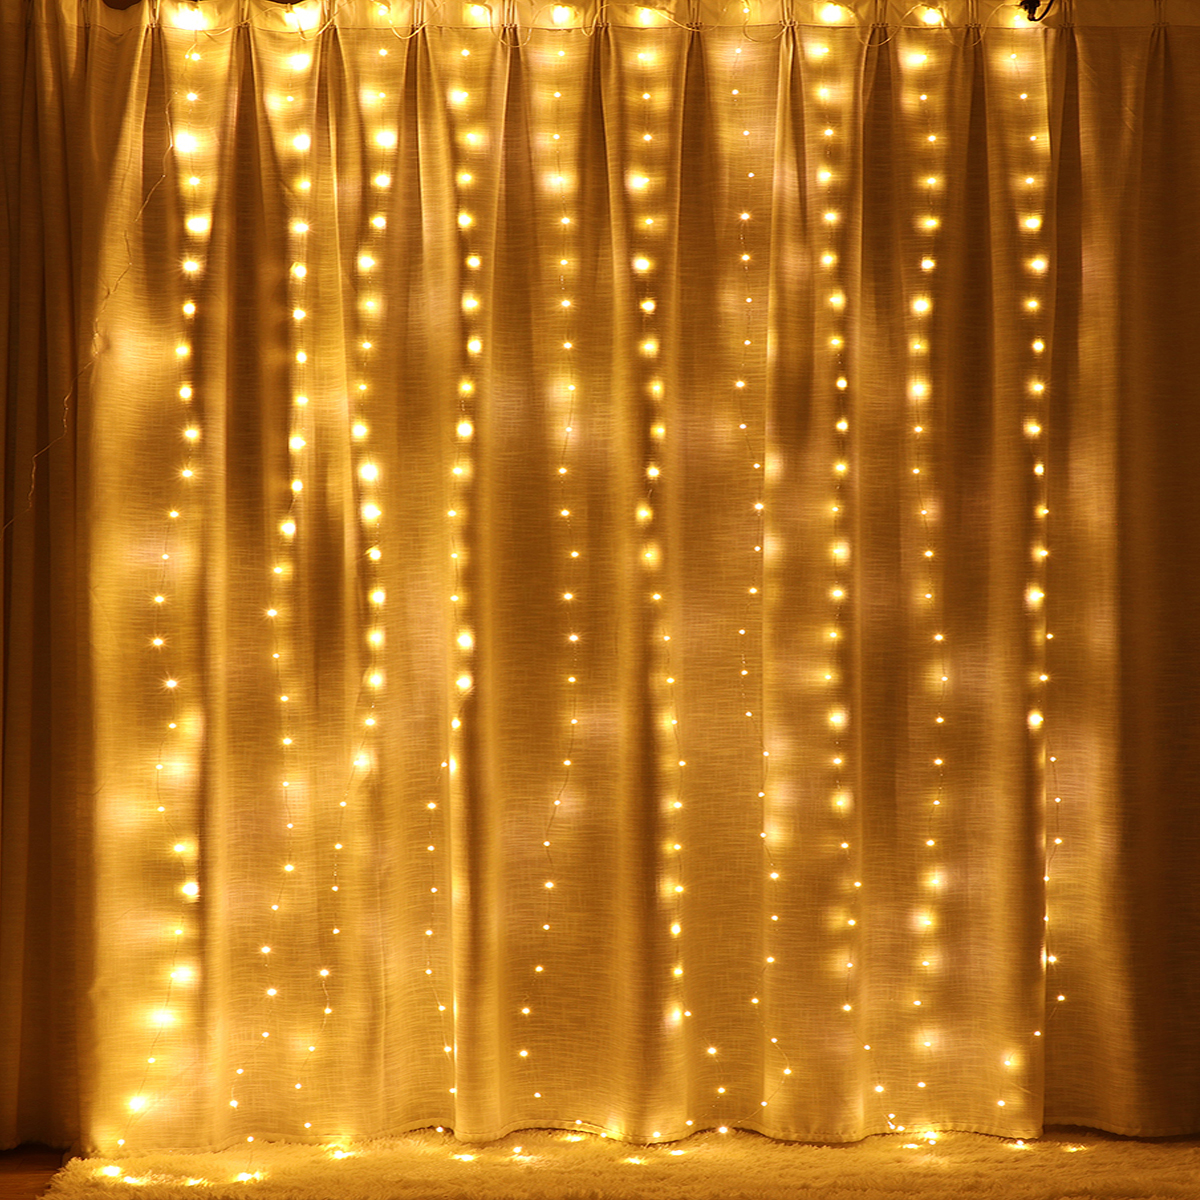 Find 3M*3M Hanging 300LED Curtain Fairy String Light 8 Modes Outdoor Wedding Party Wall Decor Lamp DC5V for Sale on Gipsybee.com with cryptocurrencies